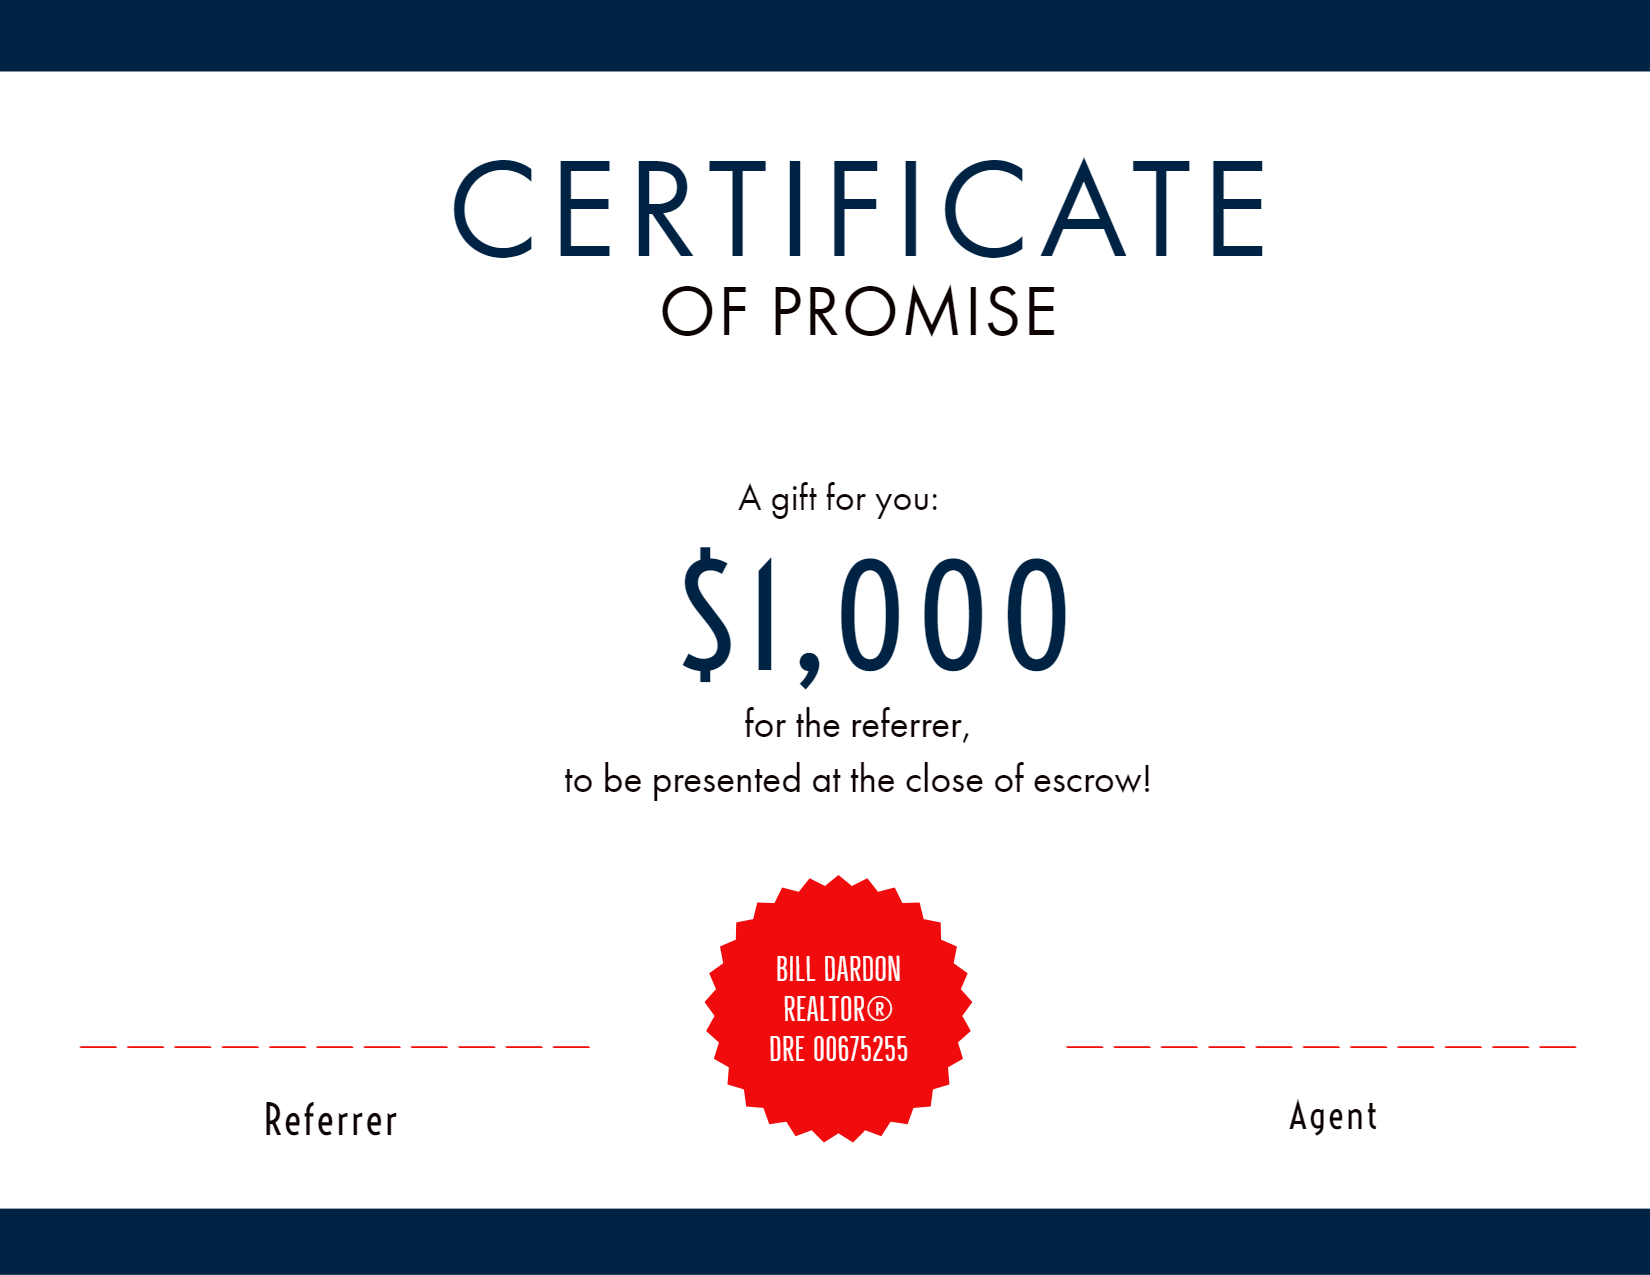 an example of the certificate of promise for referral gifts